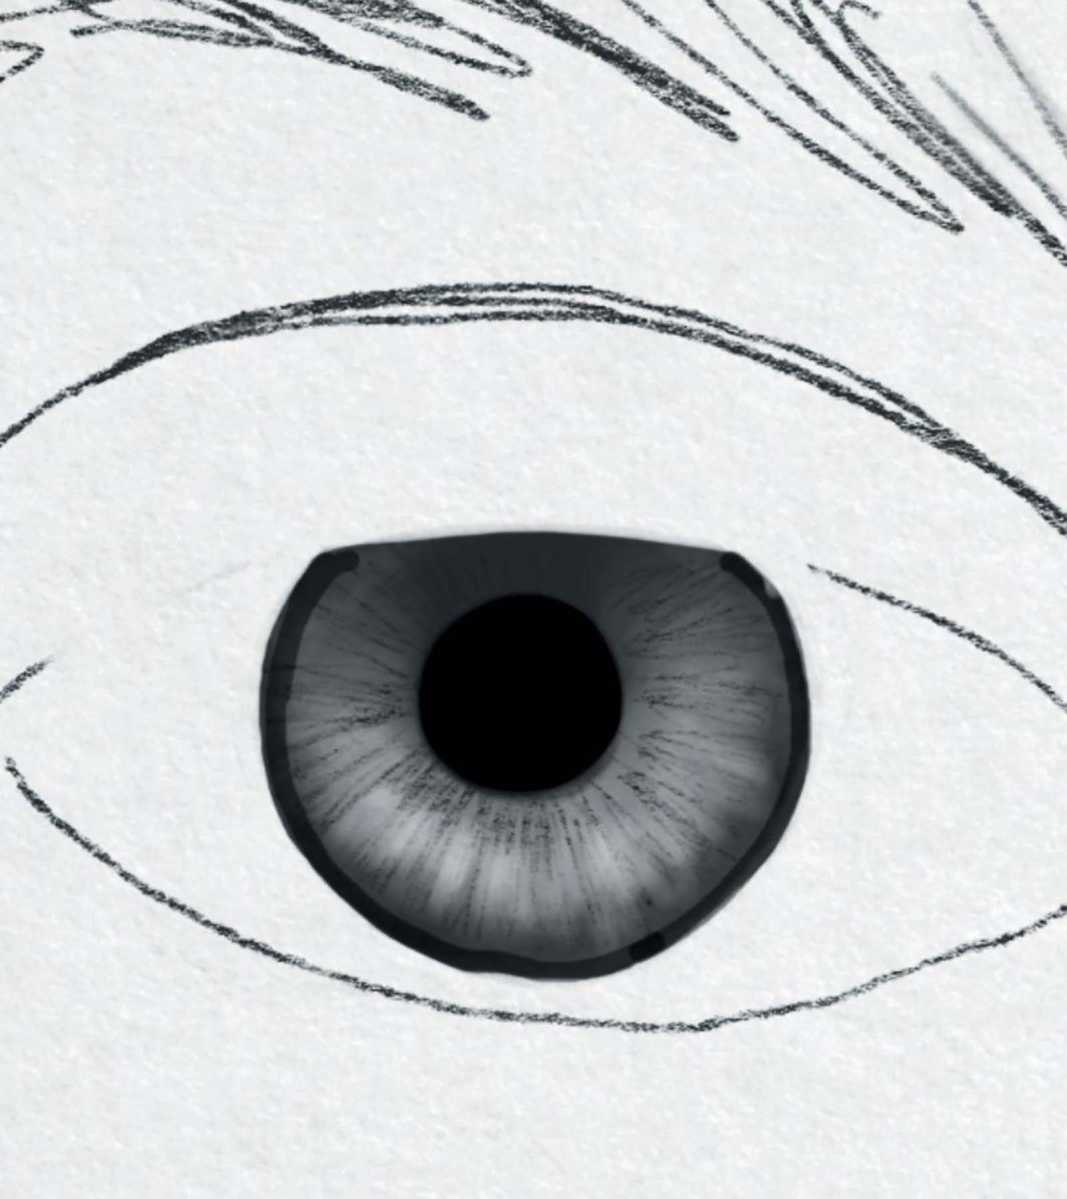 How to draw eyes in Photoshop - step 6